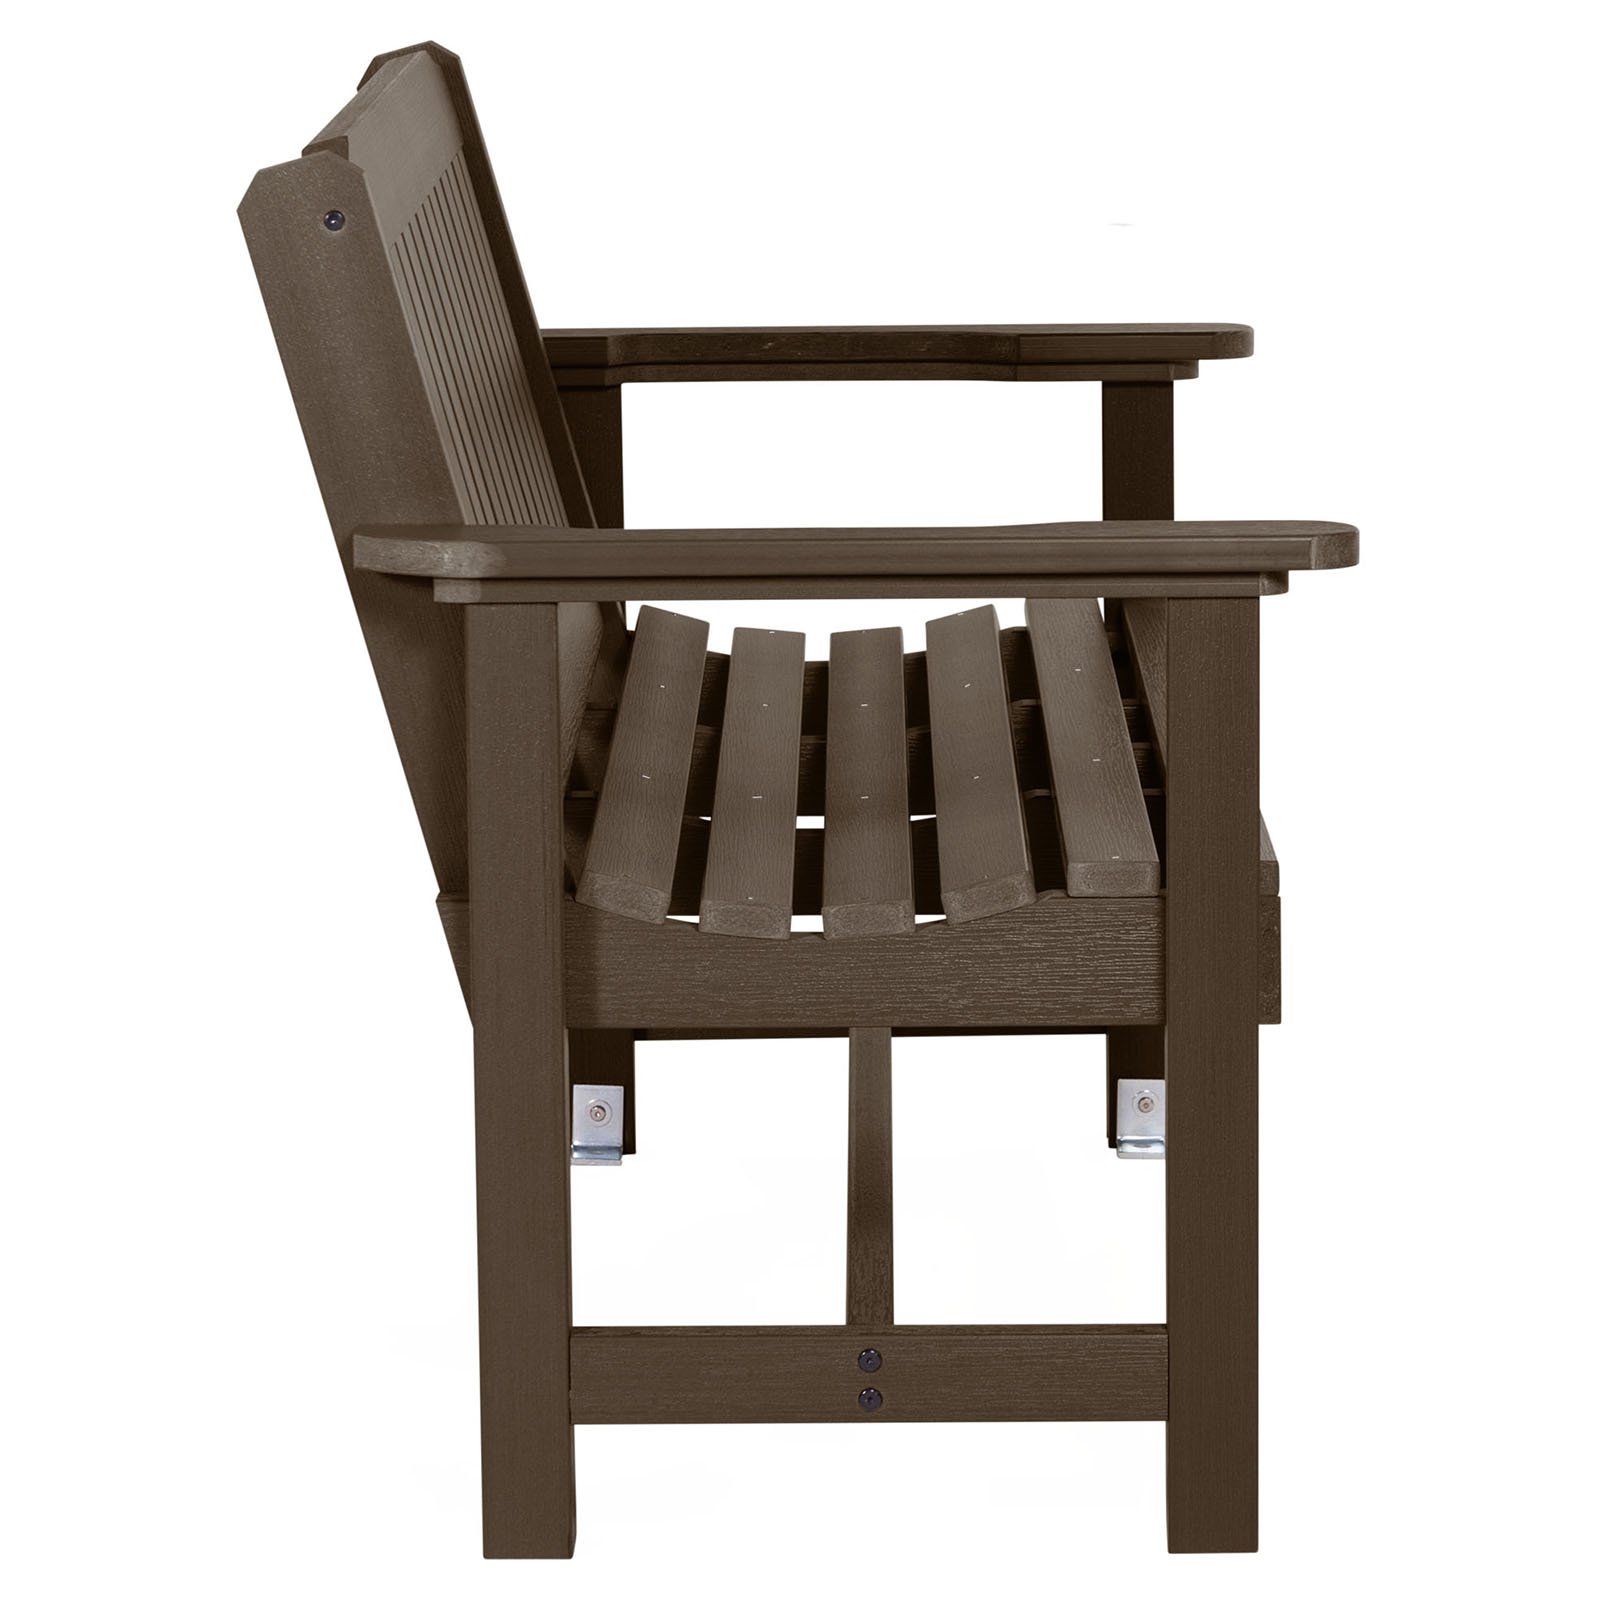 The Sequoia Professional Commercial Grade Exeter 4' Garden Bench - image 2 of 2